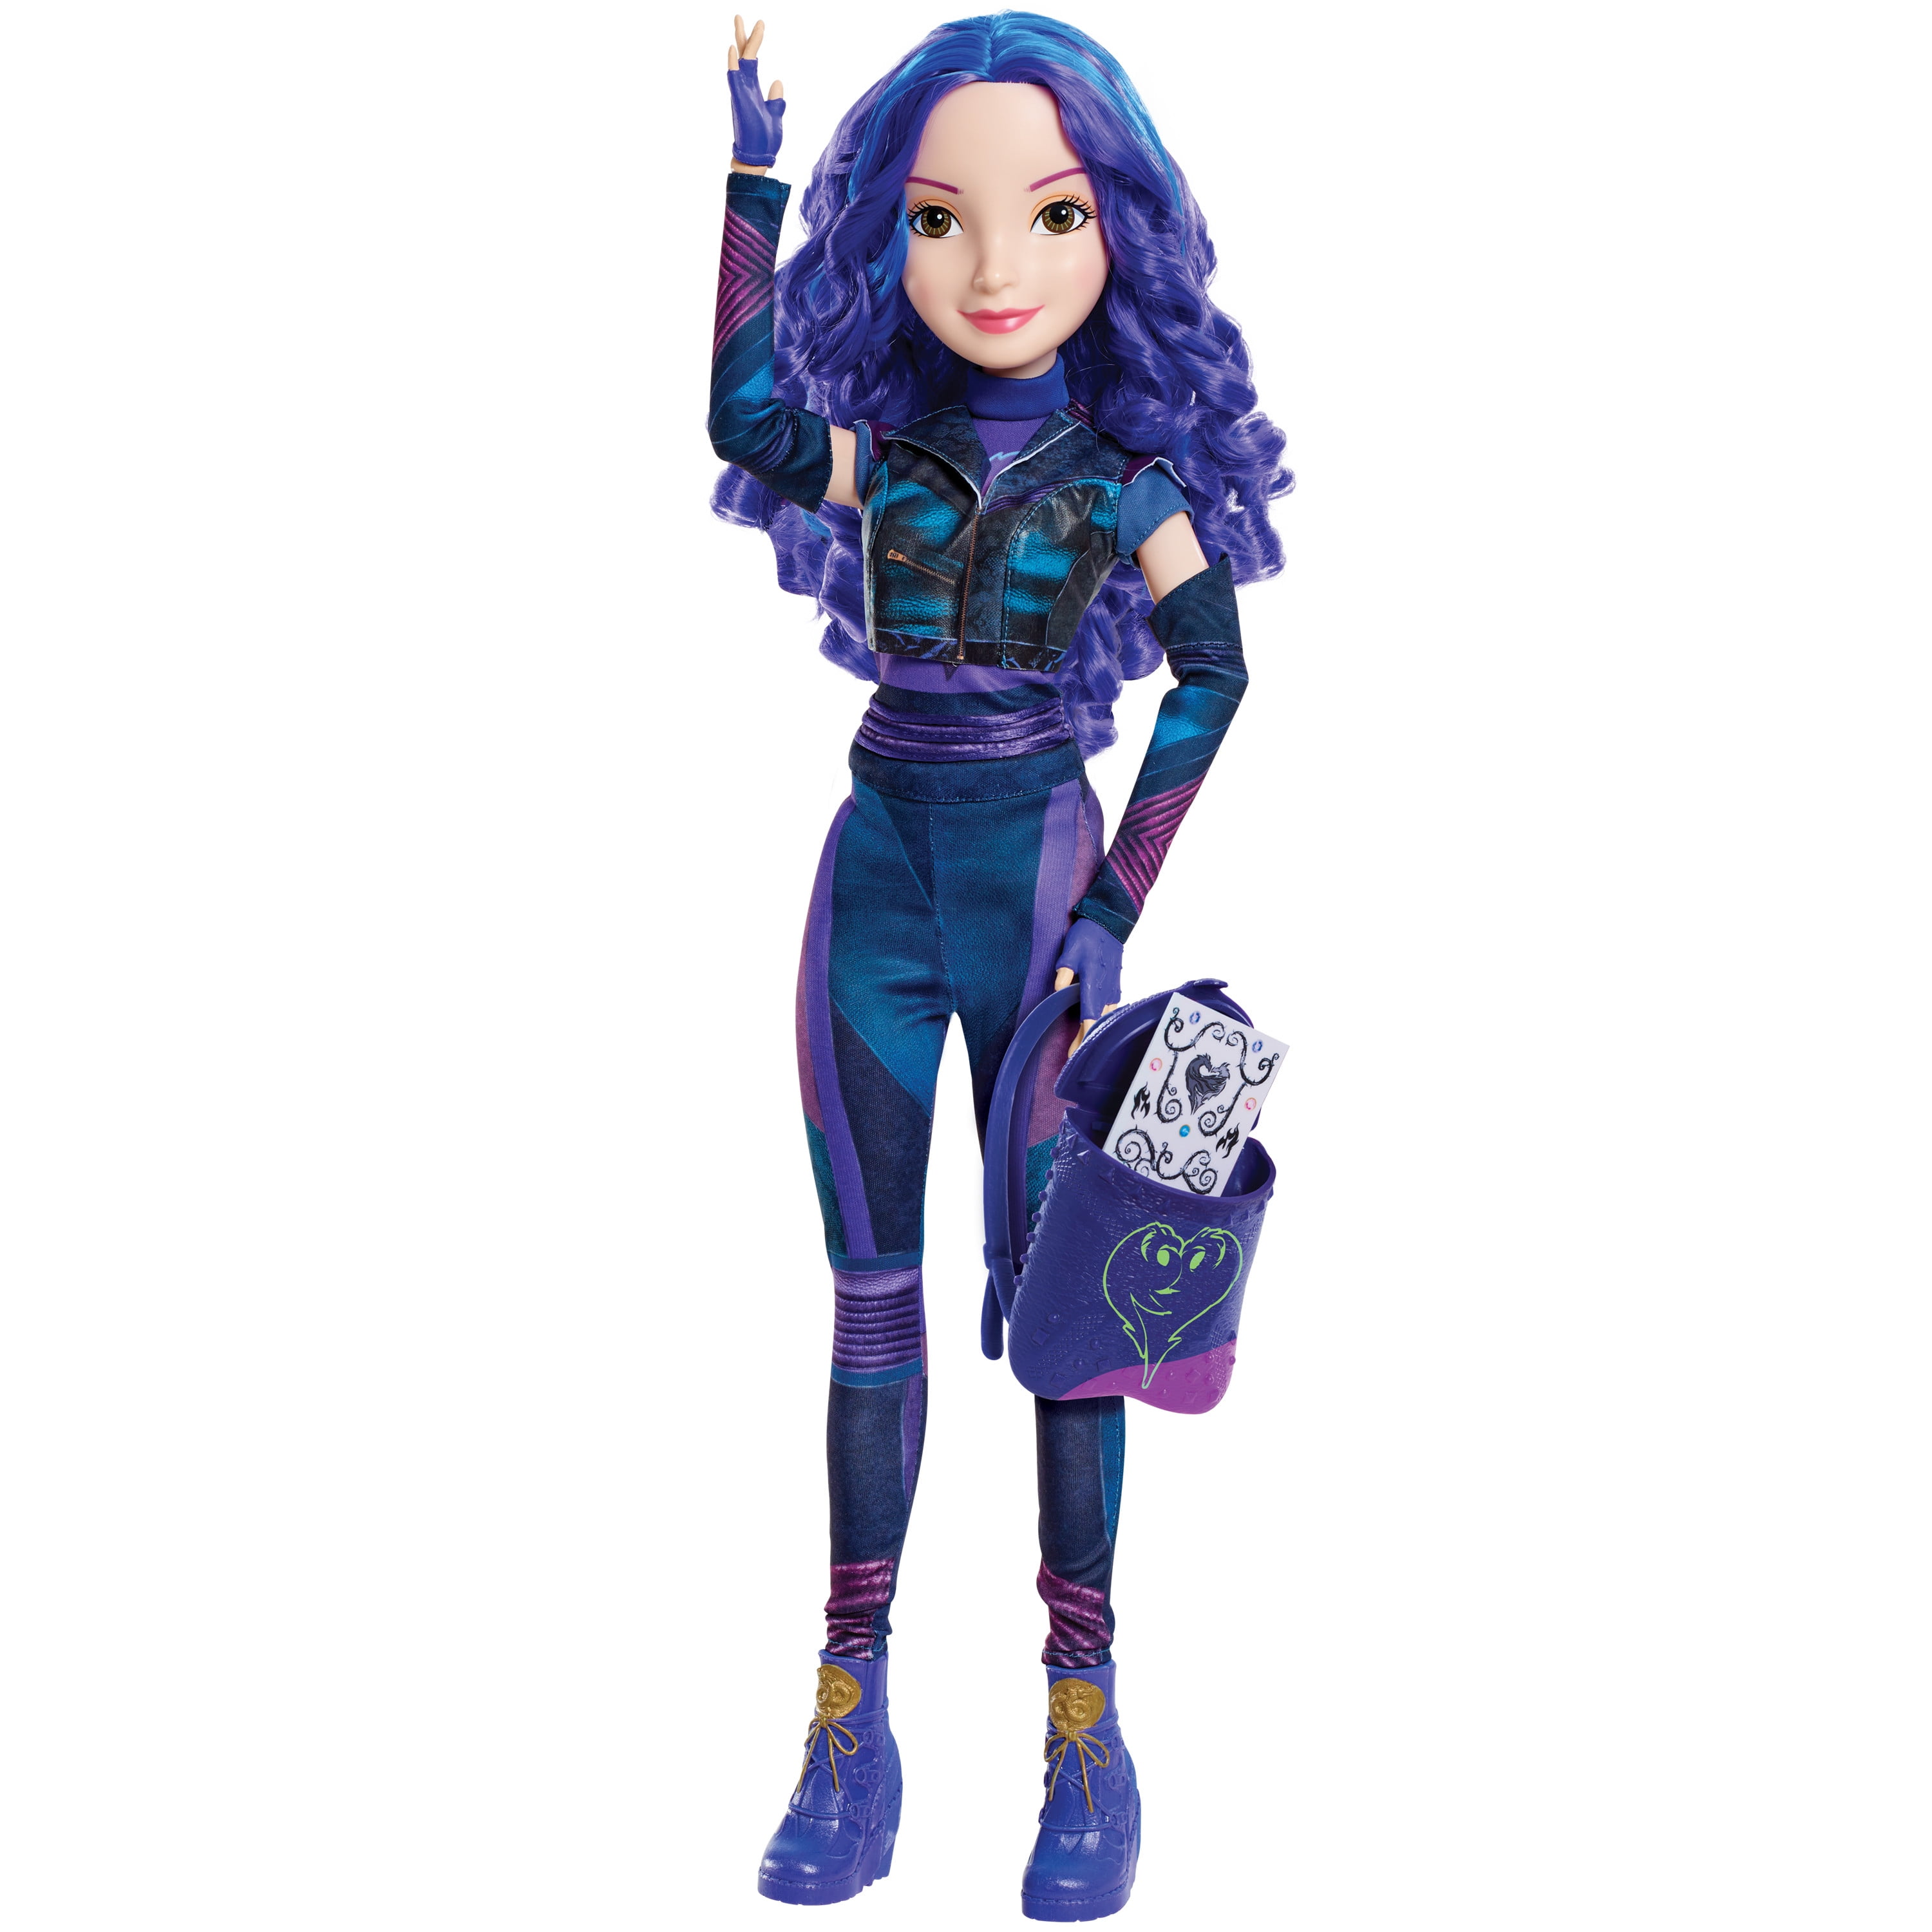 Doll, Mal, Officially Licensed Kids Toys for Ages 6 Up, Gifts and Presents - Walmart.com